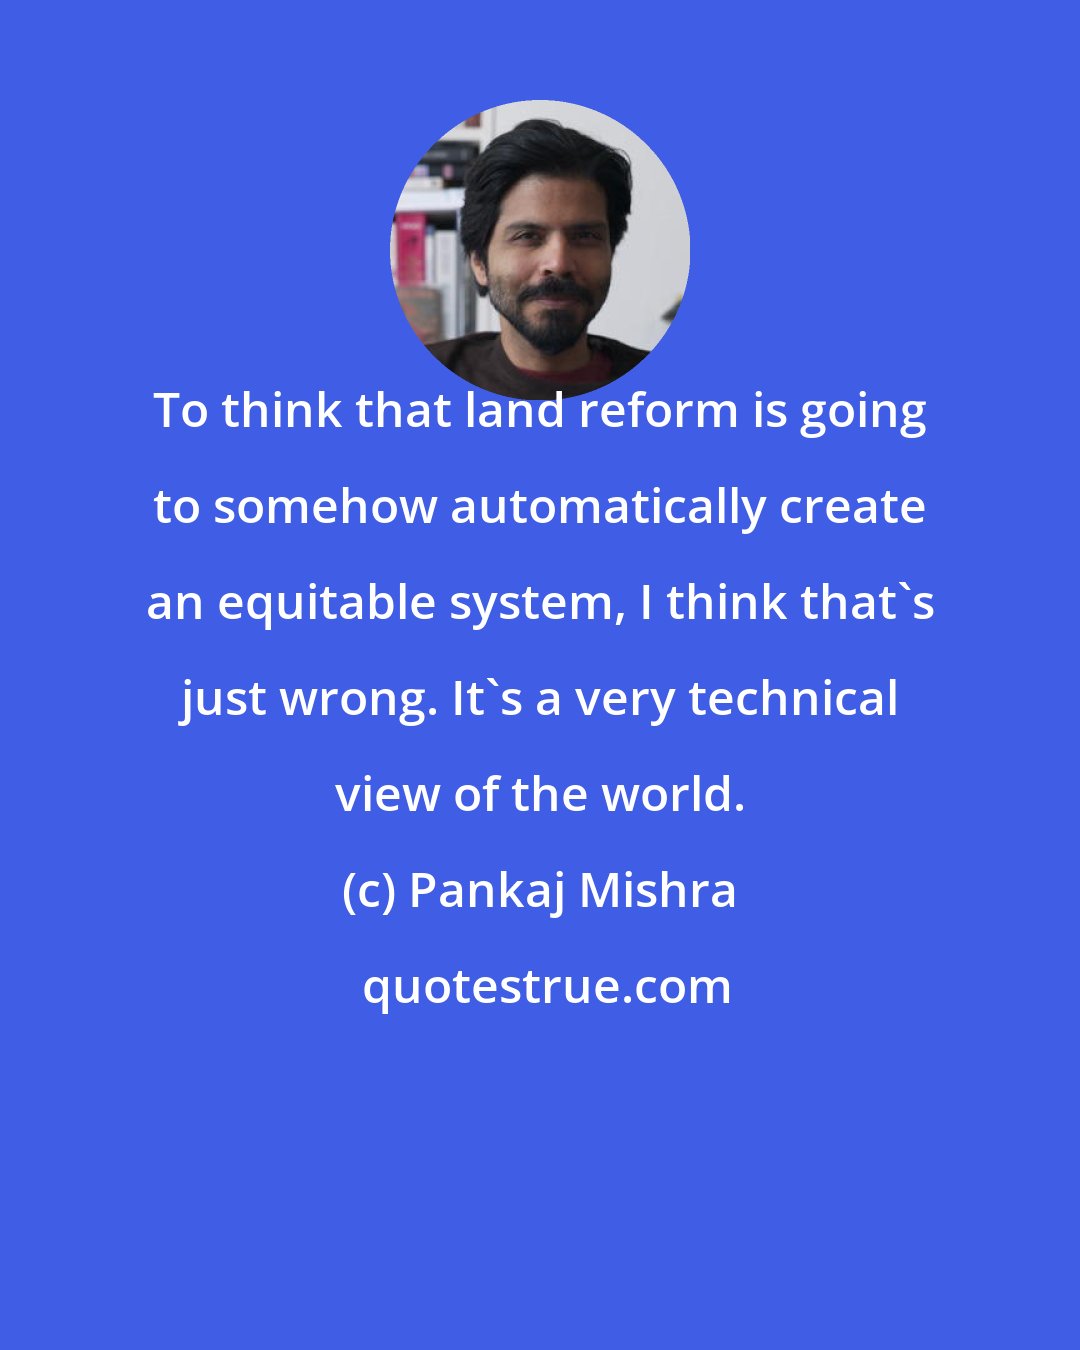 Pankaj Mishra: To think that land reform is going to somehow automatically create an equitable system, I think that's just wrong. It's a very technical view of the world.